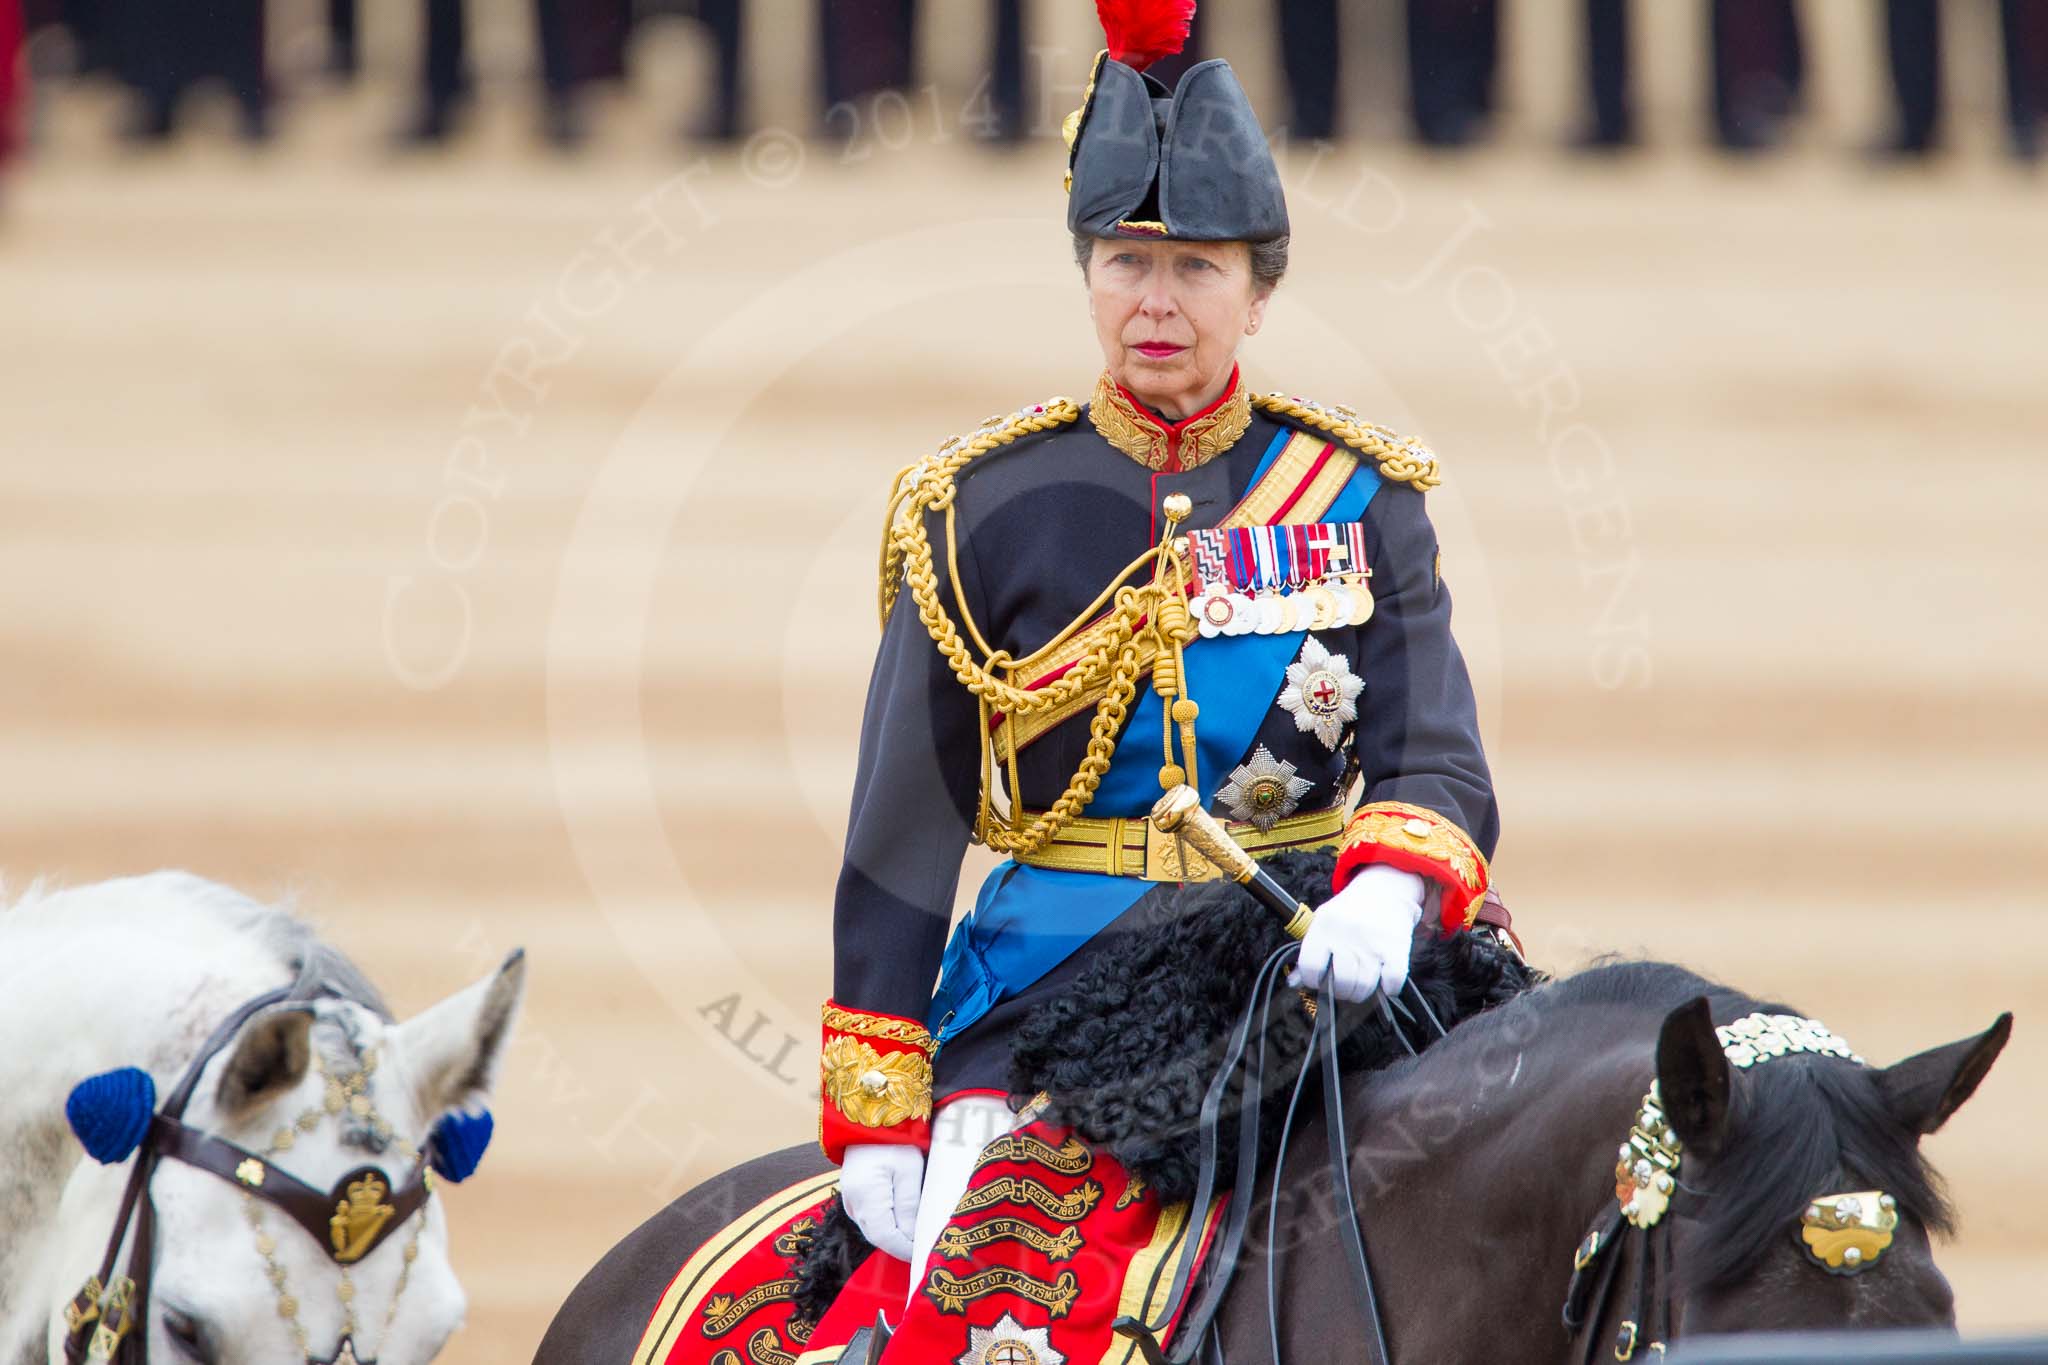 Trooping the Colour 2014.
Horse Guards Parade, Westminster,
London SW1A,

United Kingdom,
on 14 June 2014 at 11:07, image #434